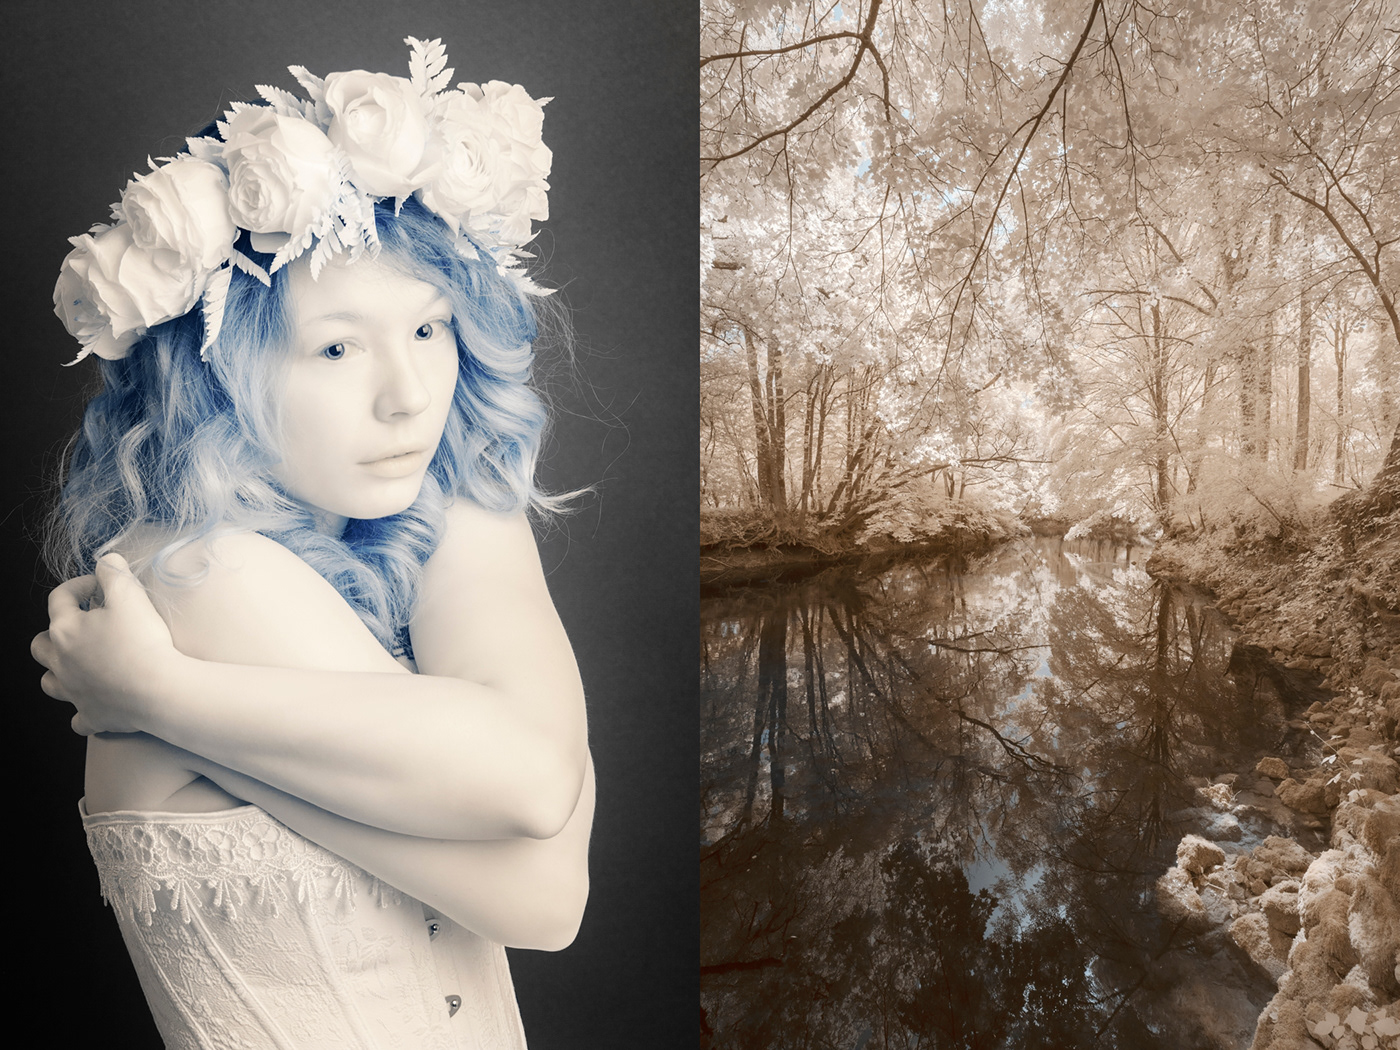 architecture Creativity diptych duality infrared Landscape Photography  portrait story surreal